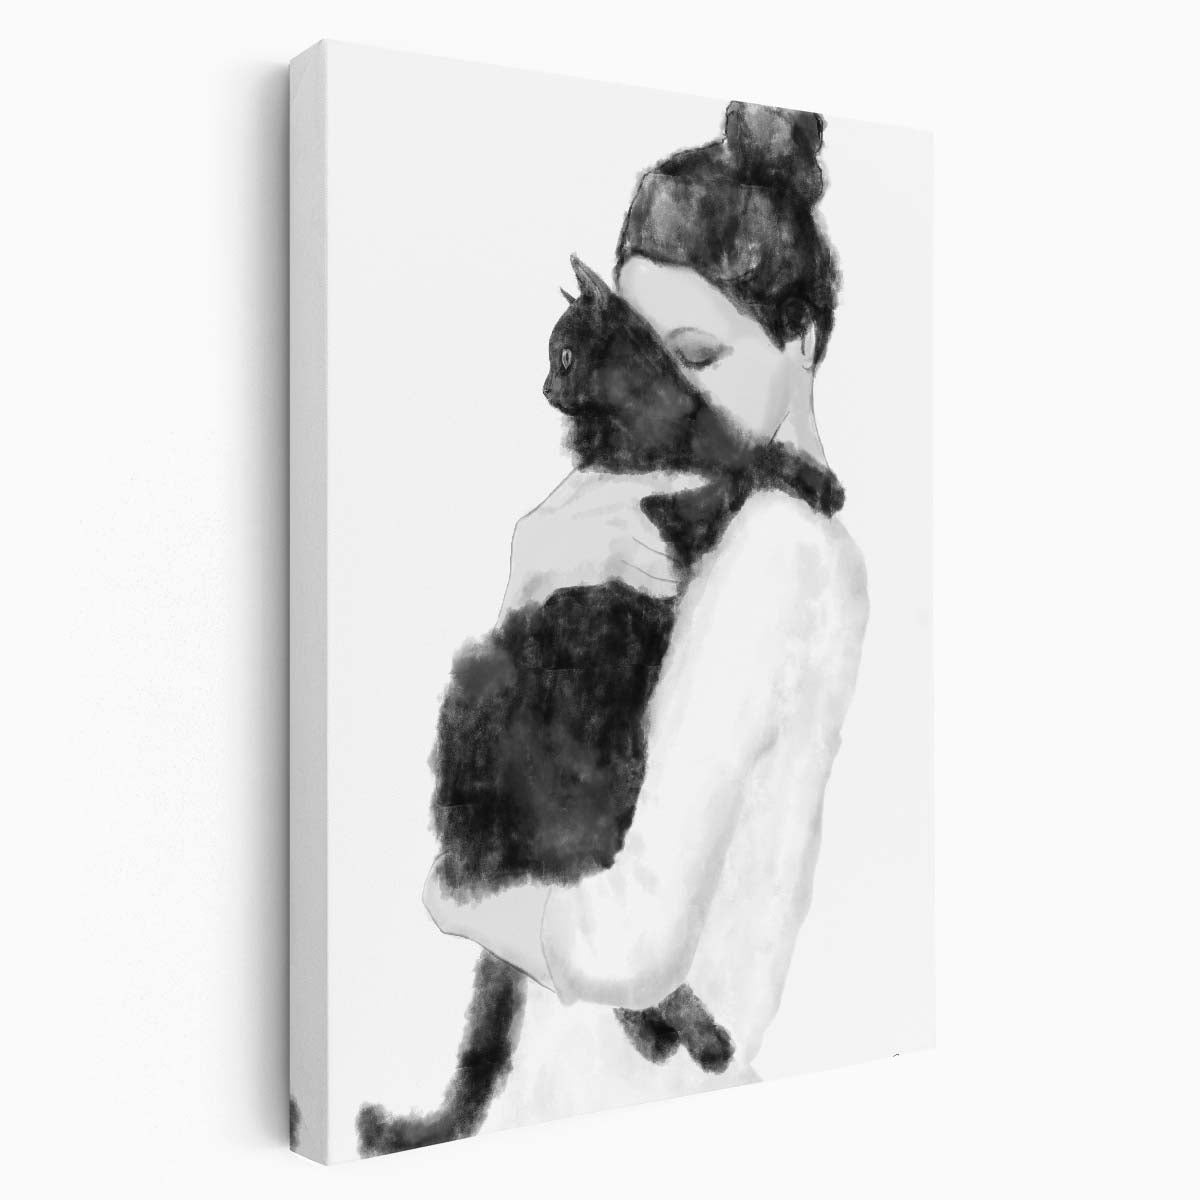 Romantic Watercolor Illustration of Woman Embracing Cat, Monochrome by Luxuriance Designs, made in USA